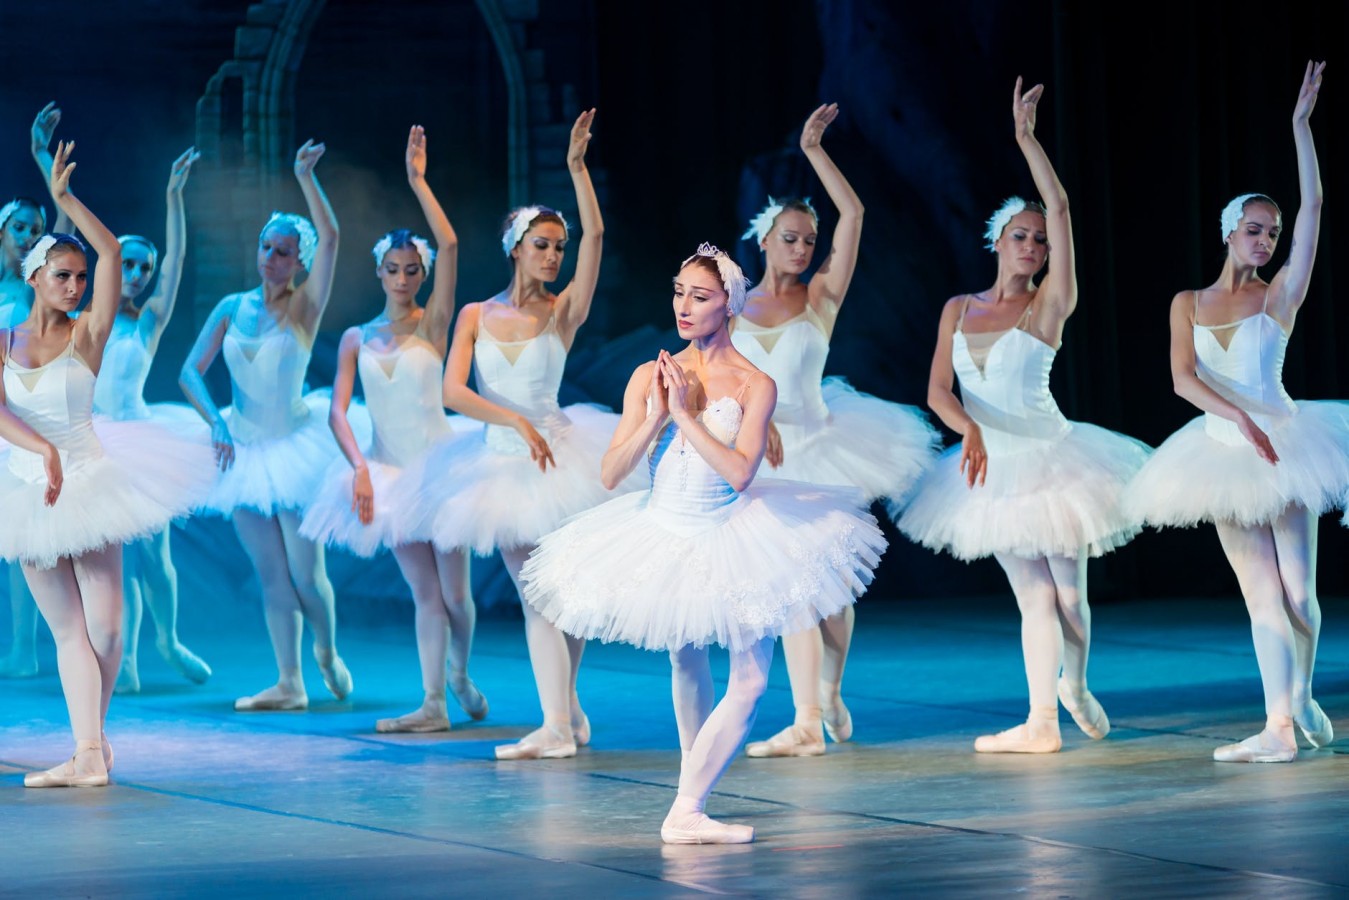 Ballet Dance: Definition, History, and Type of Dance